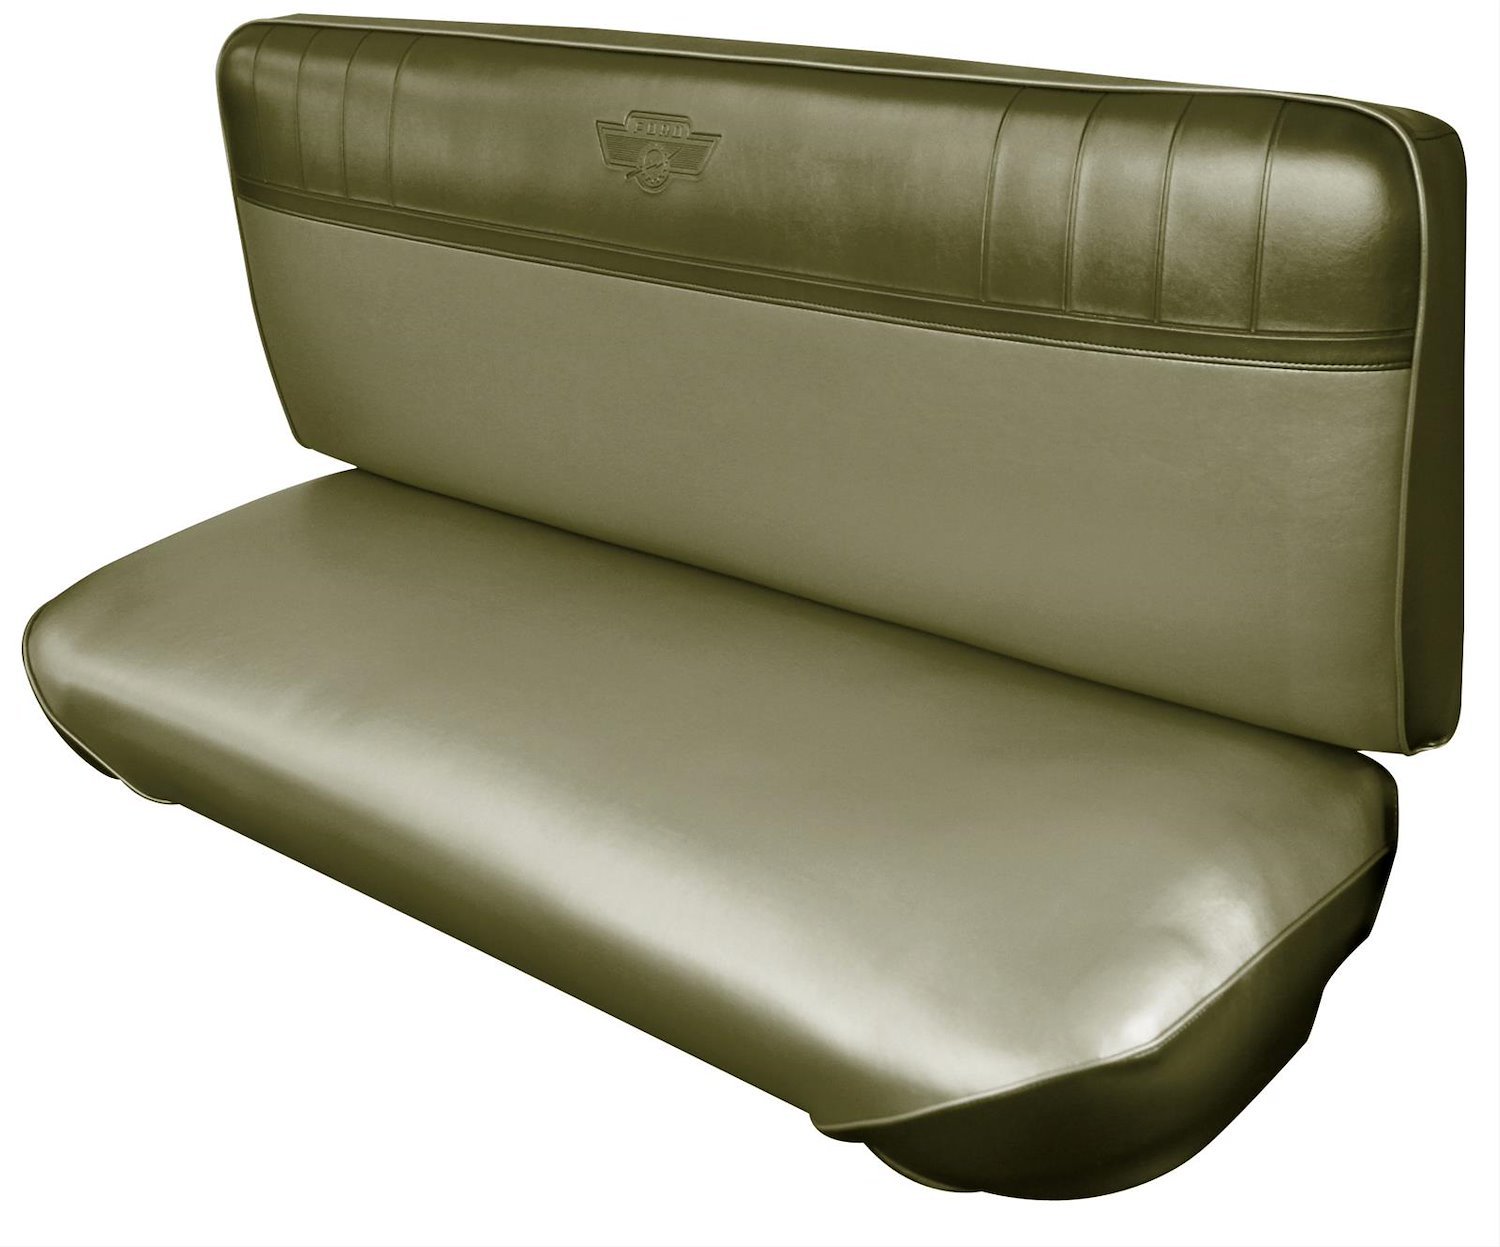 1965-1966 Ford F-100 and F-250 Truck Custom Cab Standard Two-Tone Interior Front Bench Seat Upholstery Set